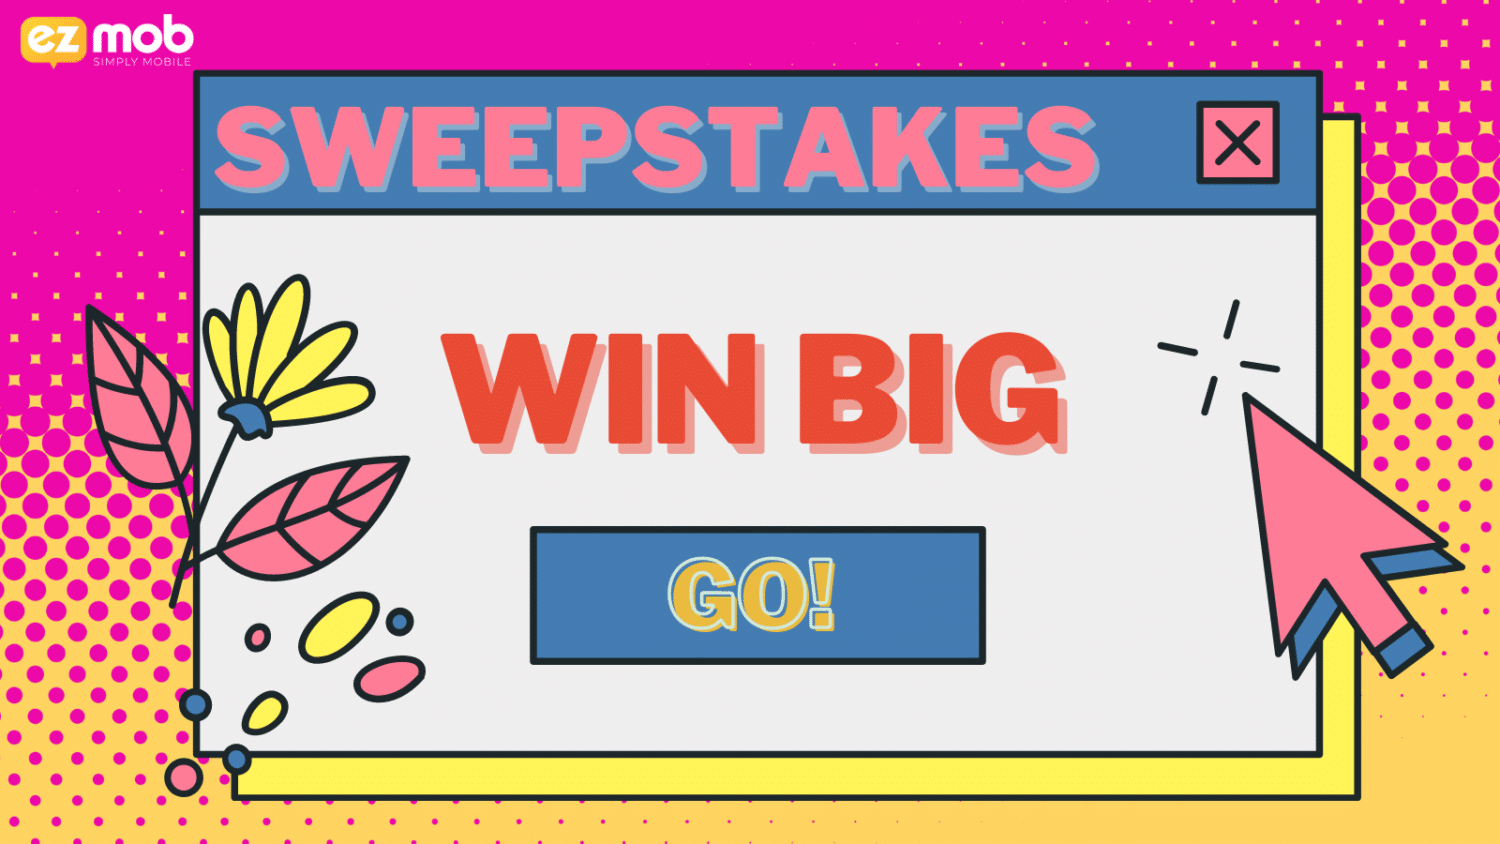 convert sweepstakes offers